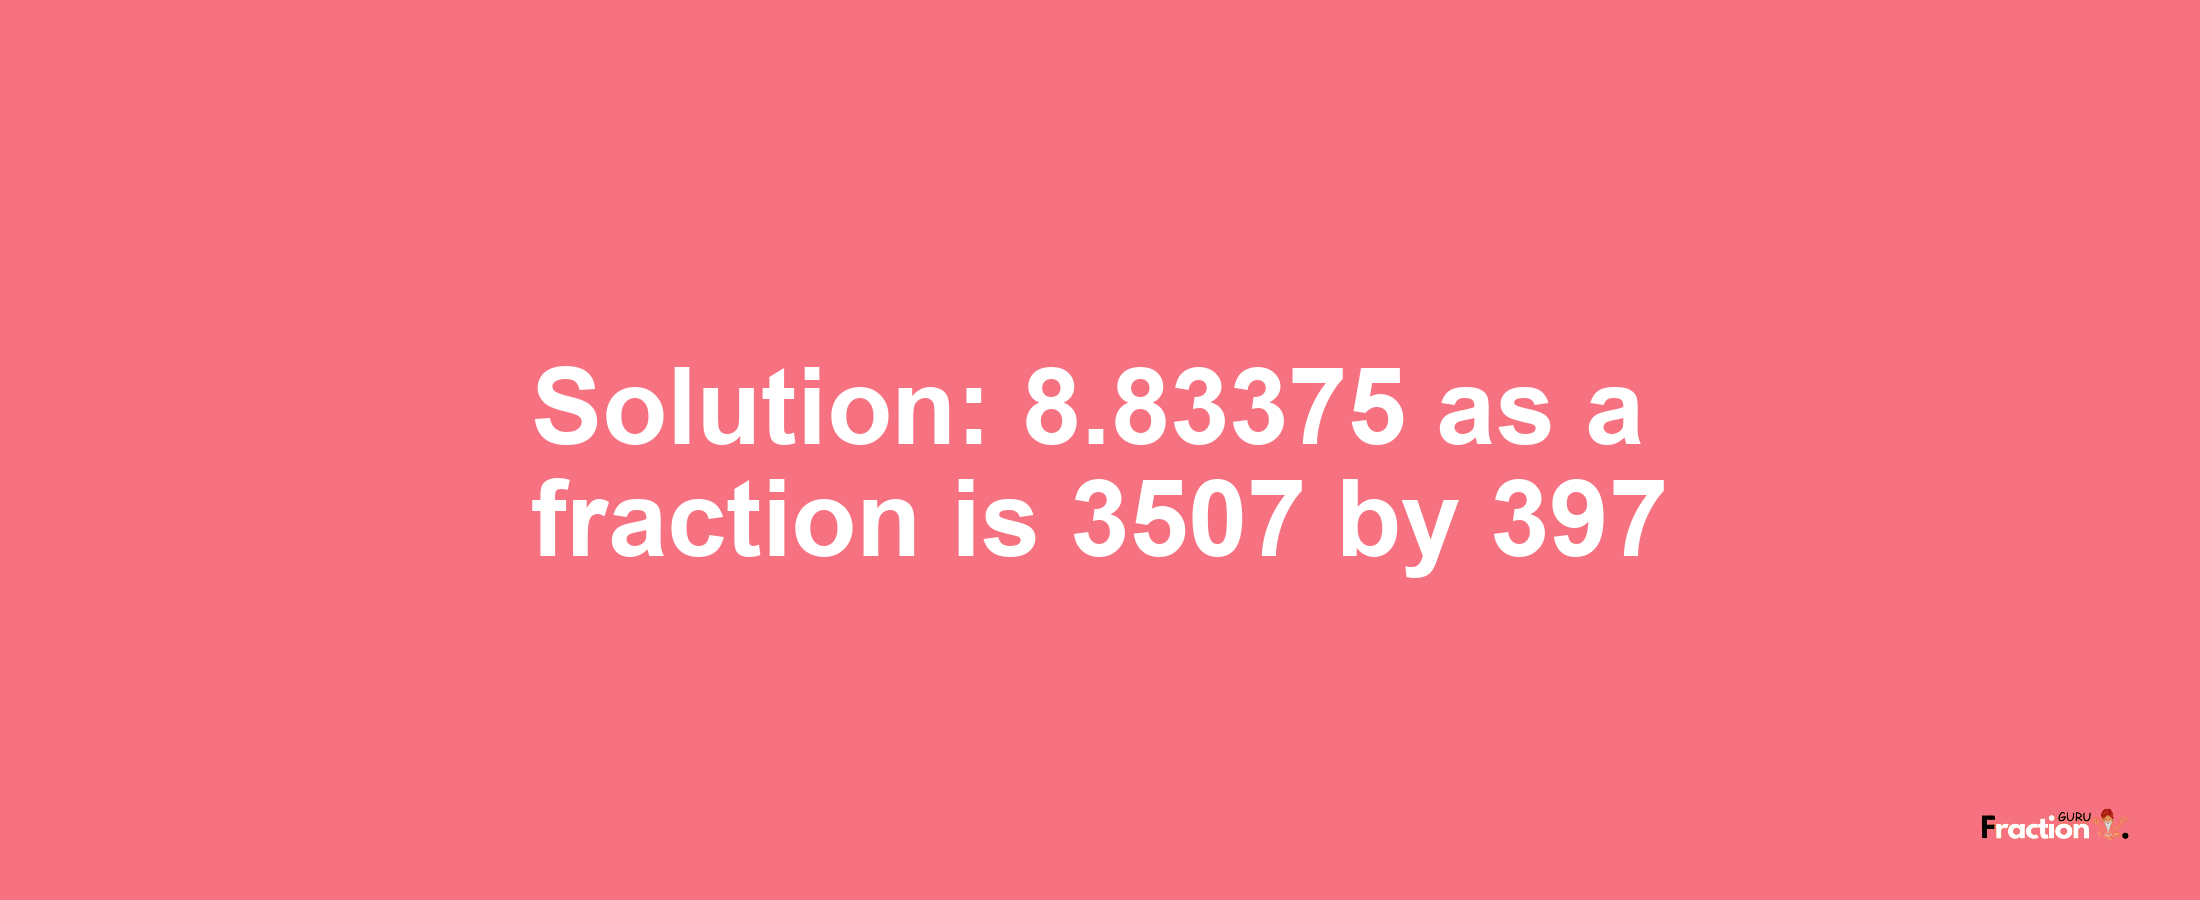 Solution:8.83375 as a fraction is 3507/397